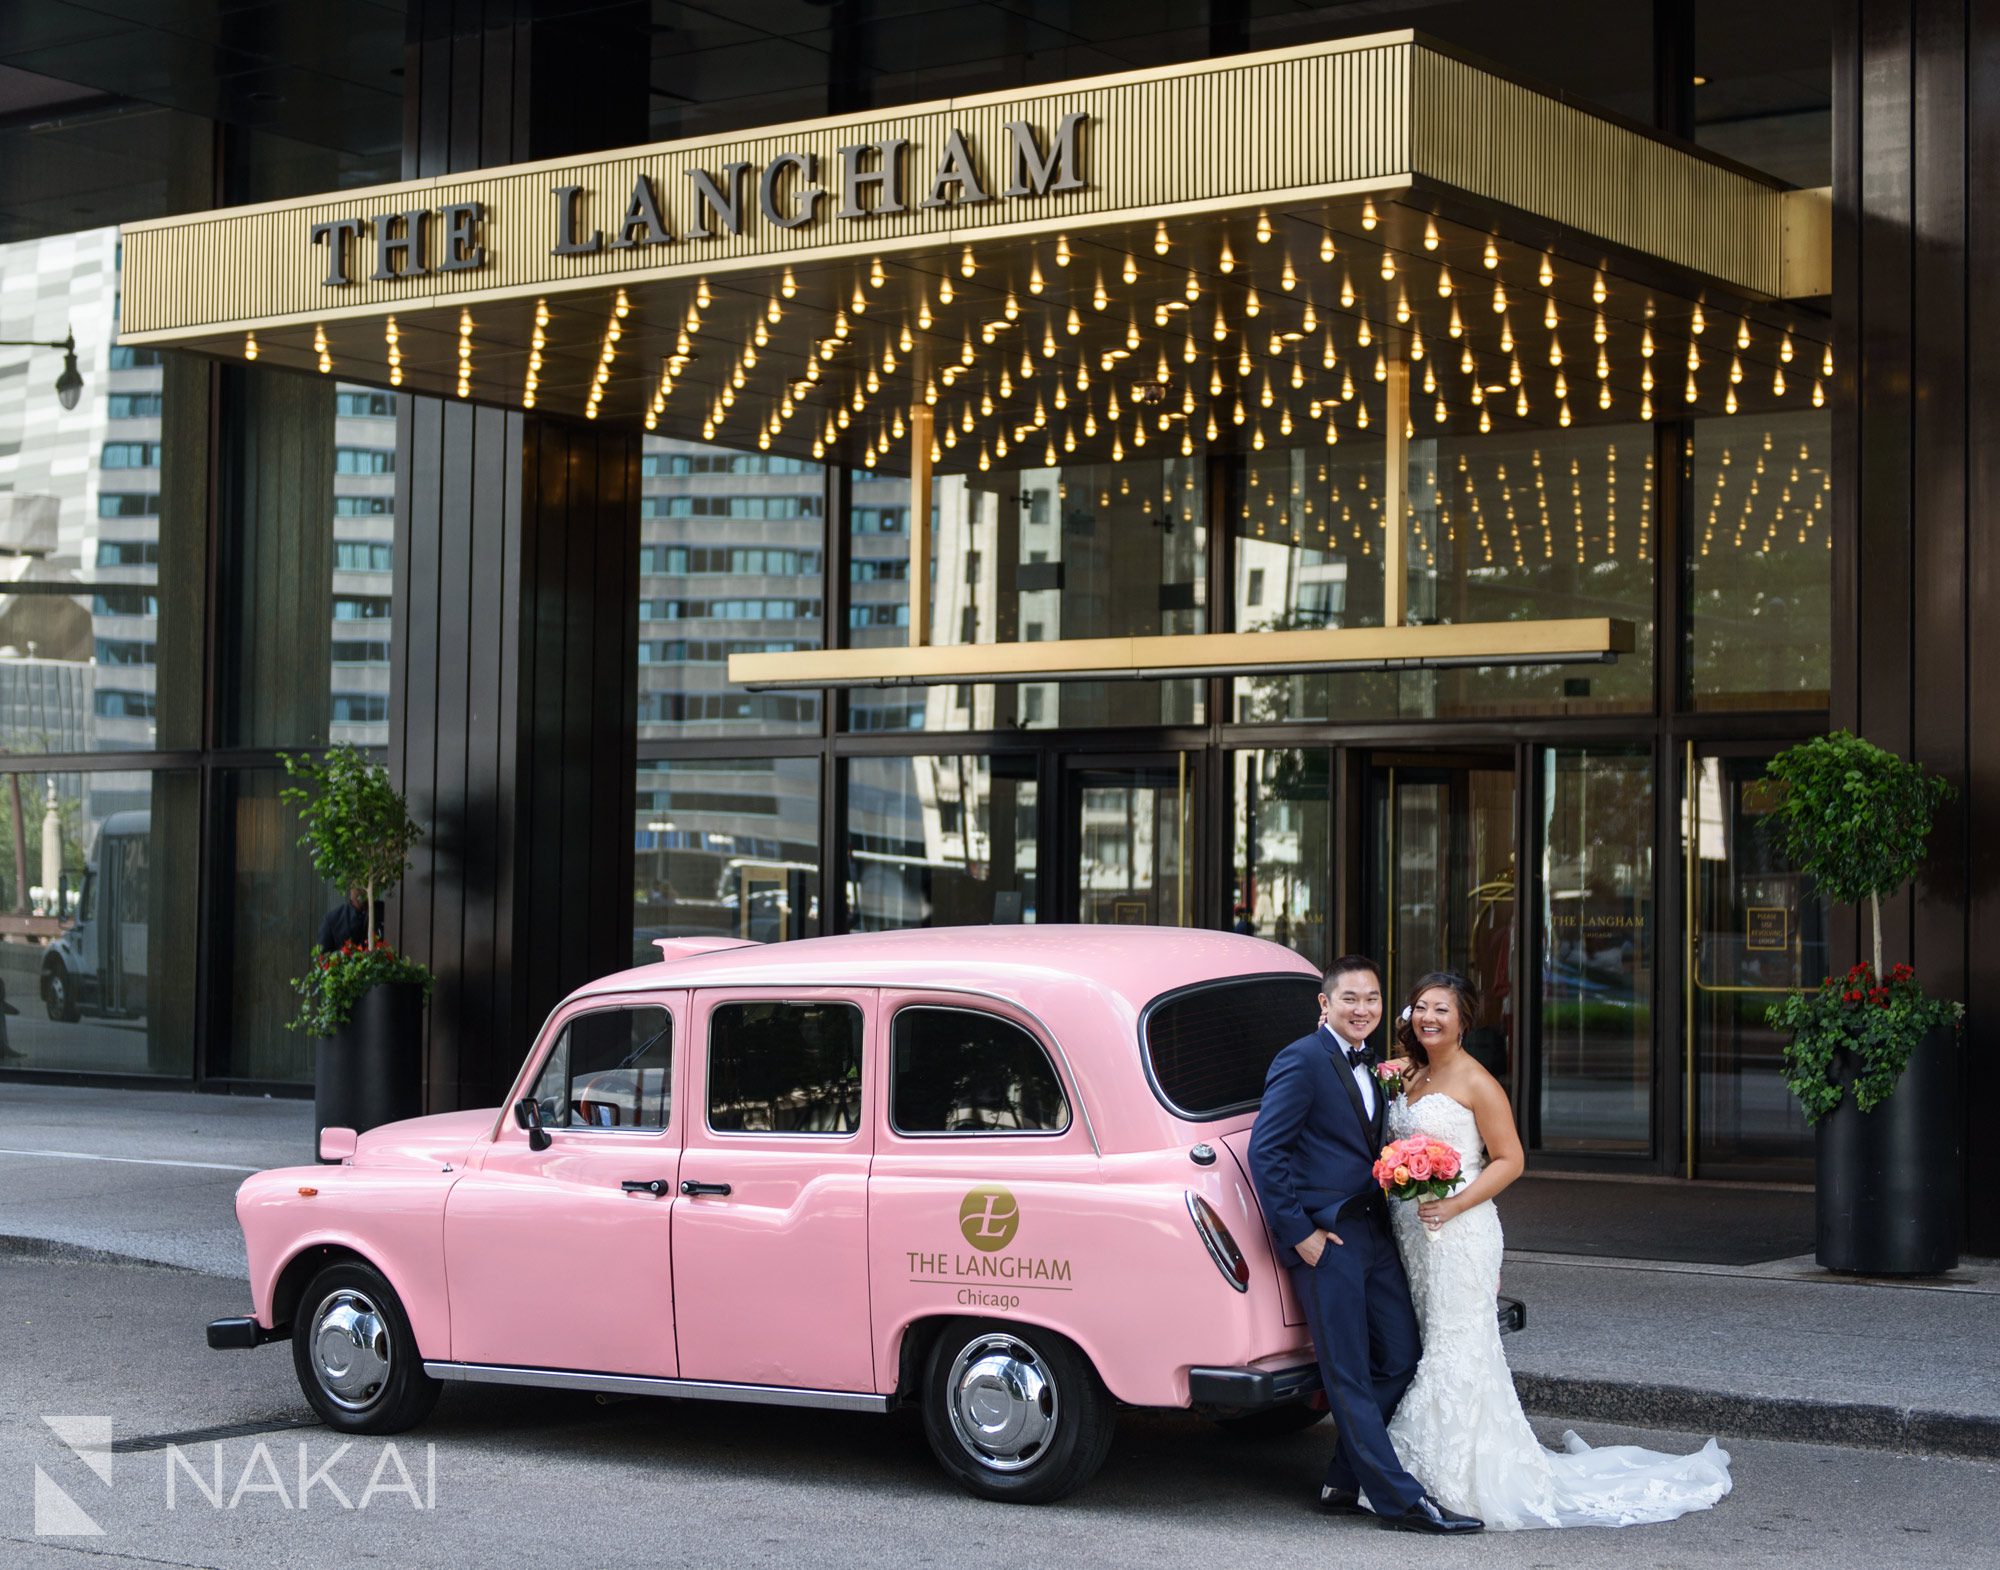 Langham hotel Chicago wedding picture pink taxi 